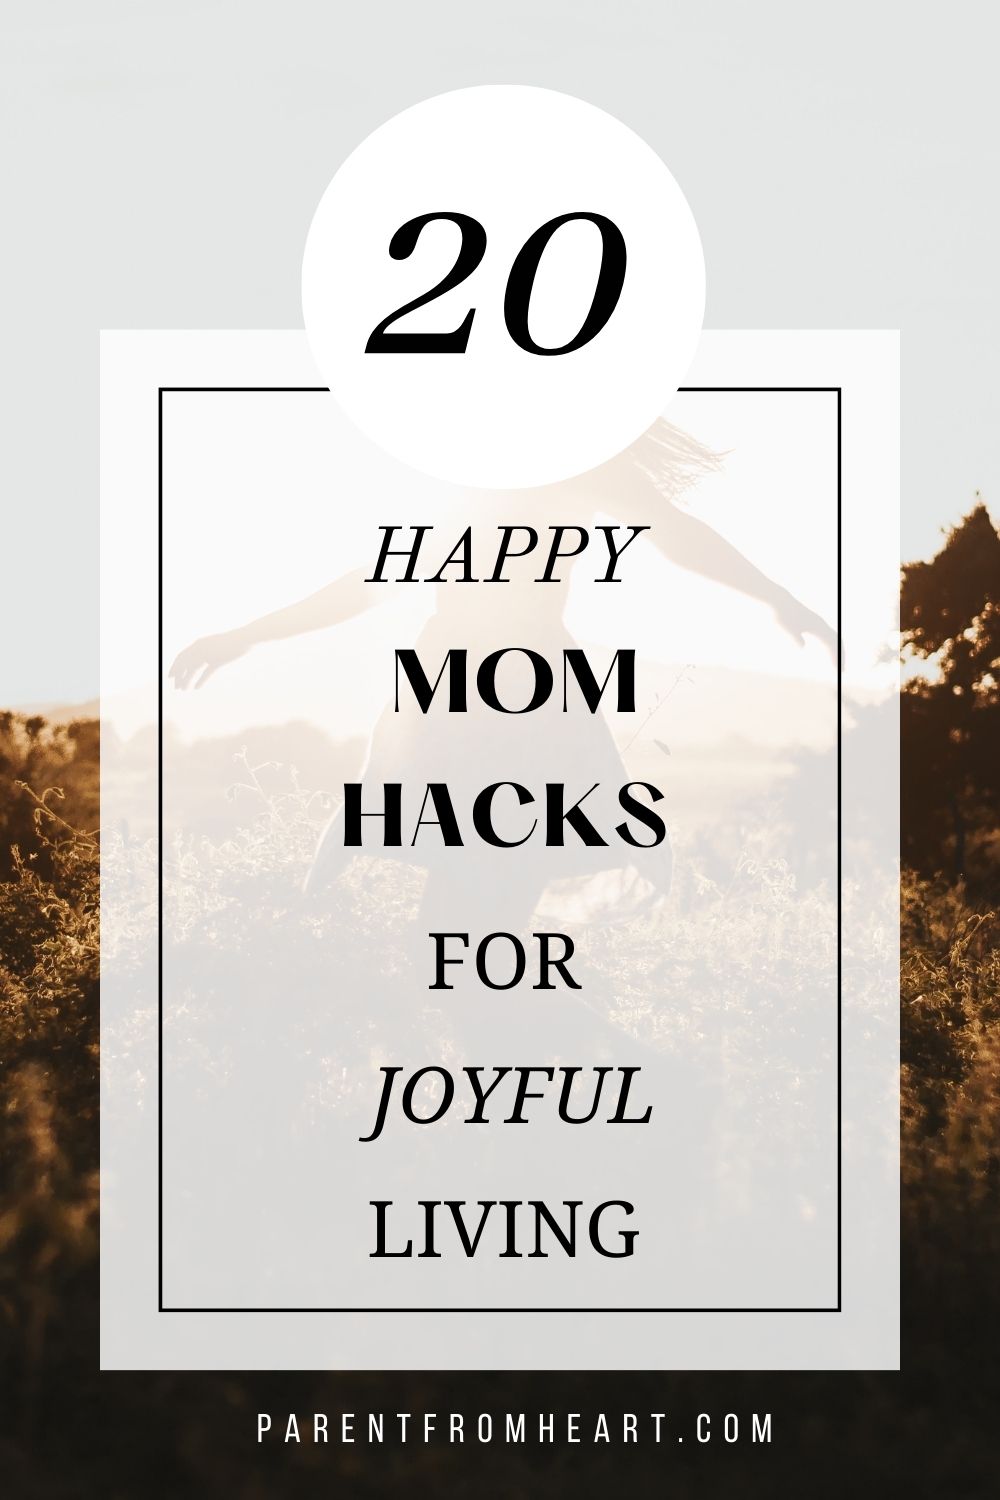 20 Happy Mom Hacks Cover Photo- Mother dancing 